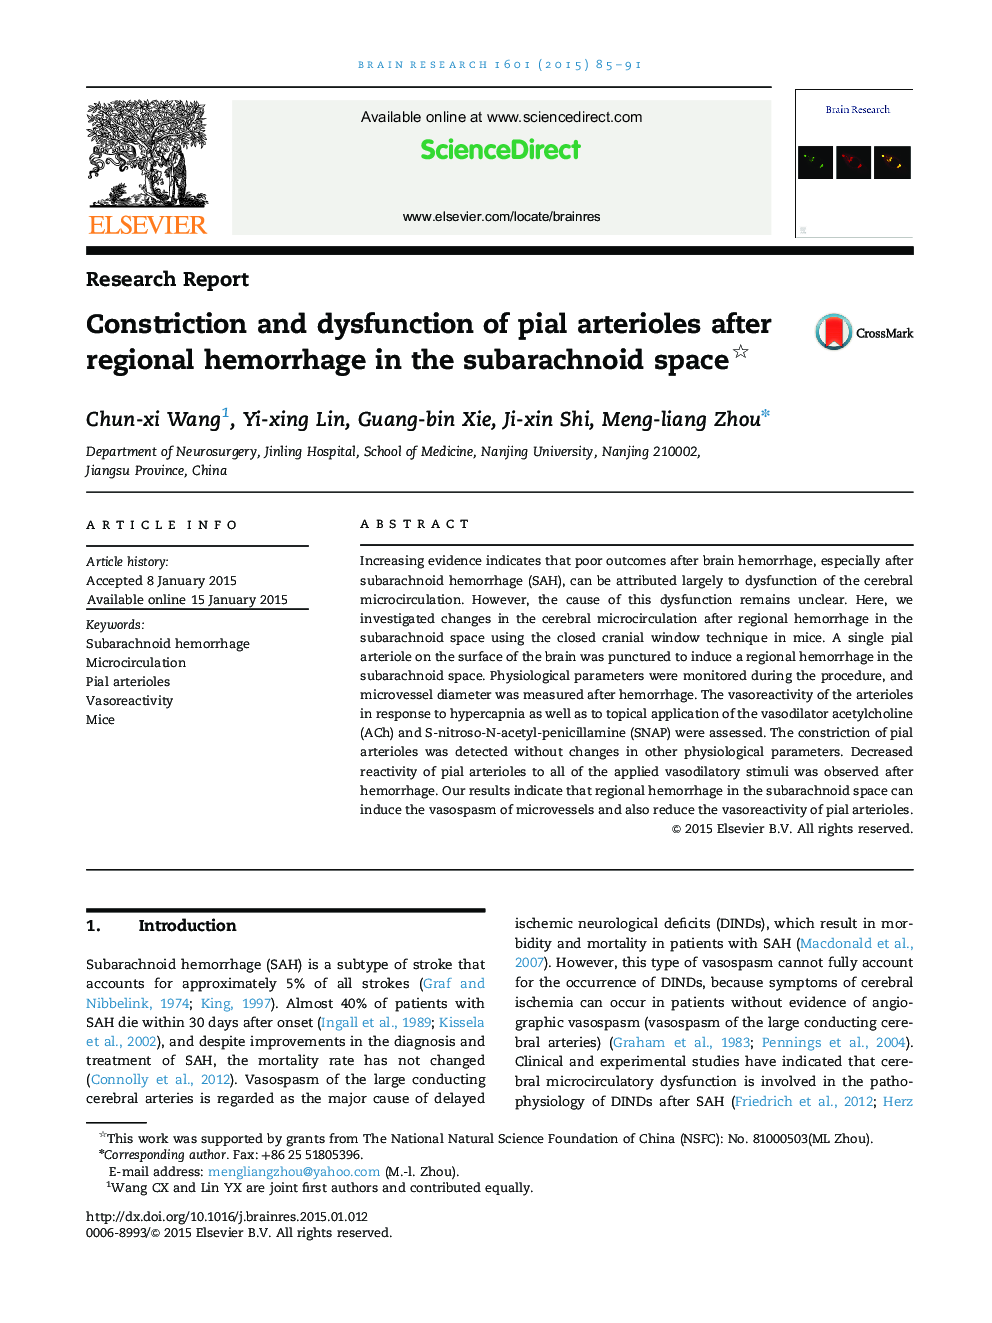 Research ReportConstriction and dysfunction of pial arterioles after regional hemorrhage in the subarachnoid space